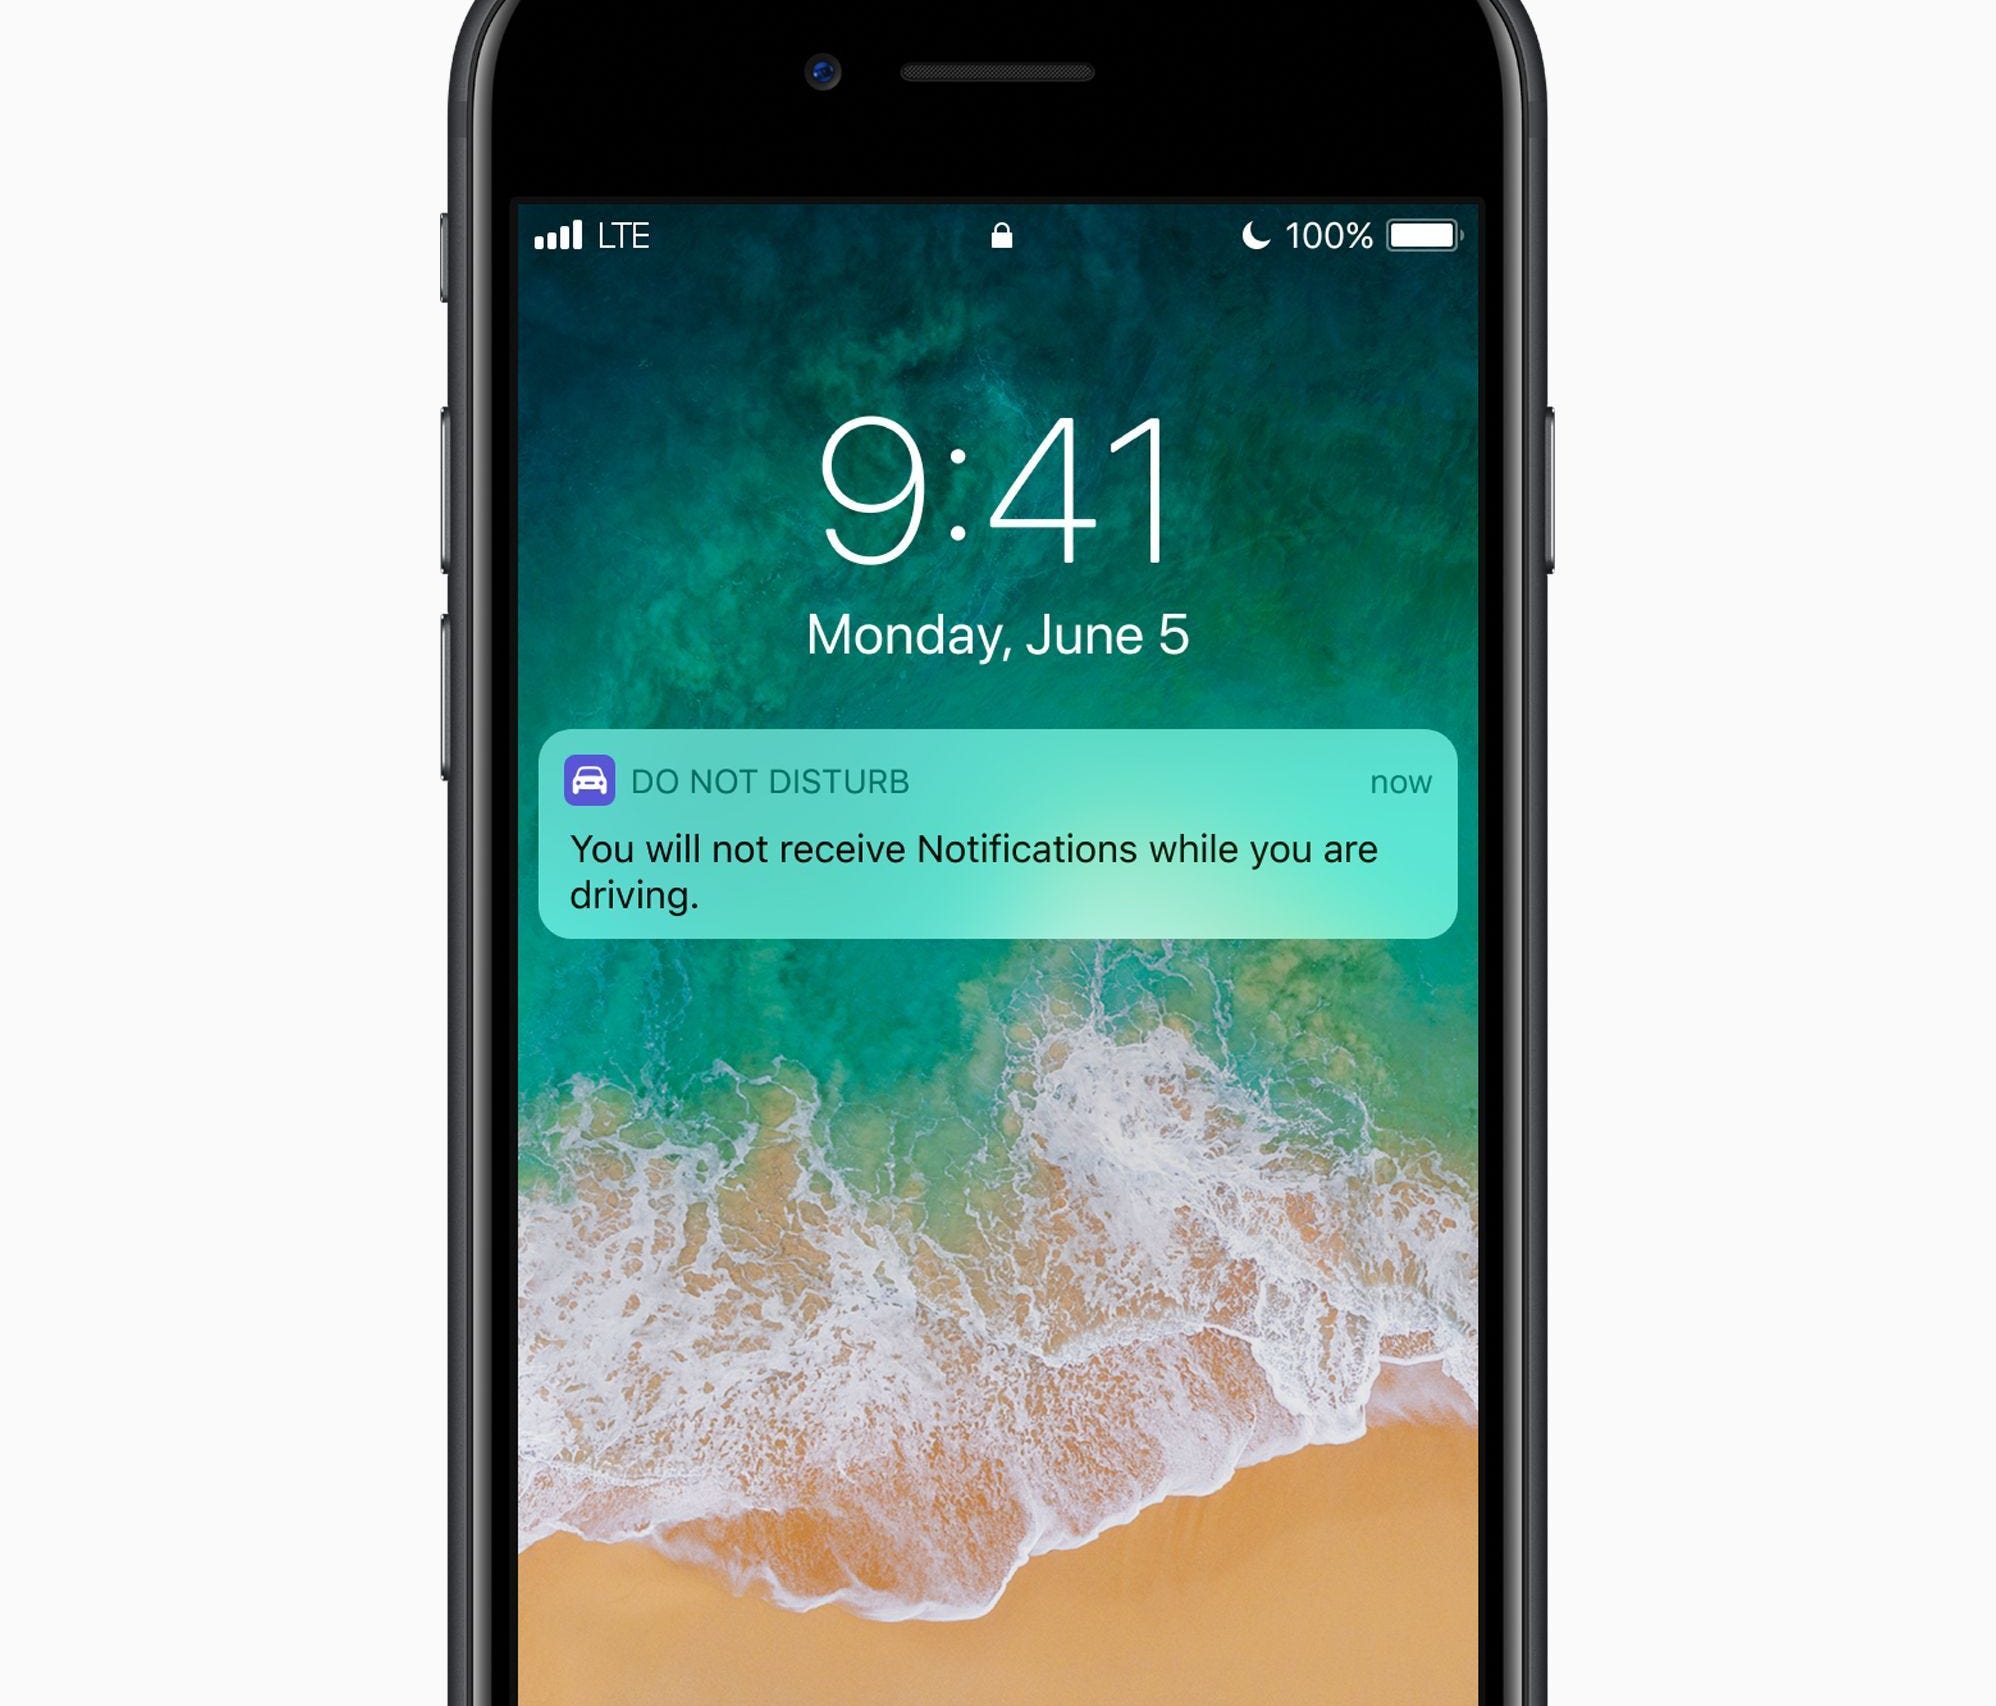 Apple's new mobile operating system for iPhones and iPads -- iOS 11, coming this fall -- lets drivers enact a Do Not Disturb while driving mode.